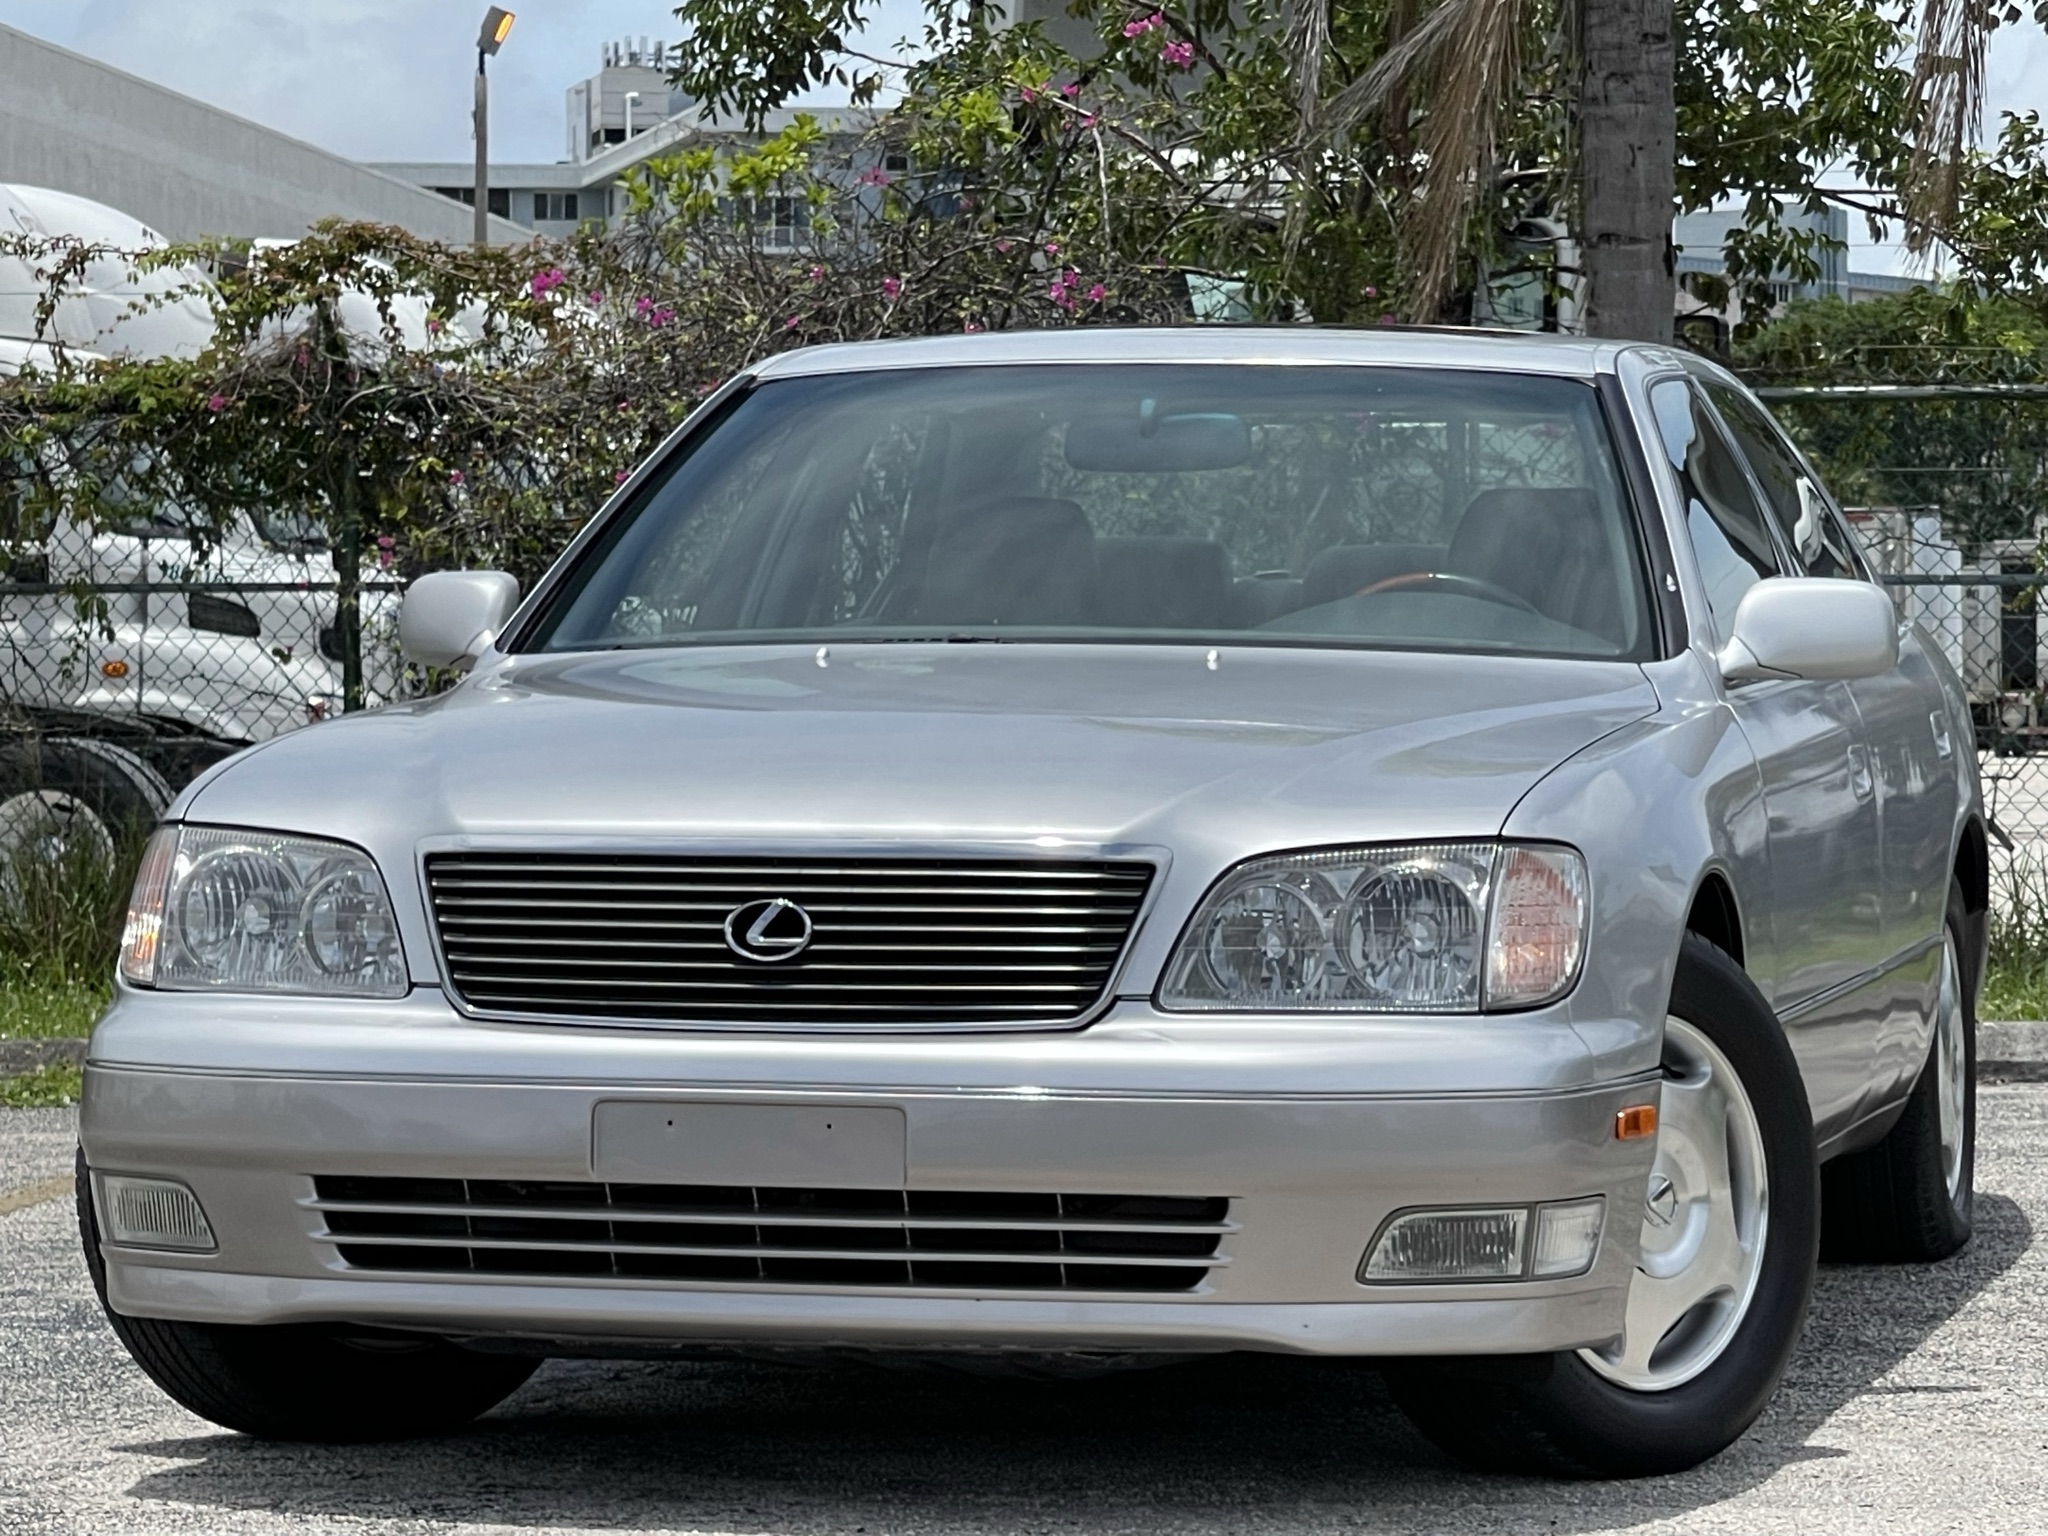 Buy Used 1998 LEXUS LS400 LUXURY for $11 900 from trusted dealer in  Brooklyn, NY!